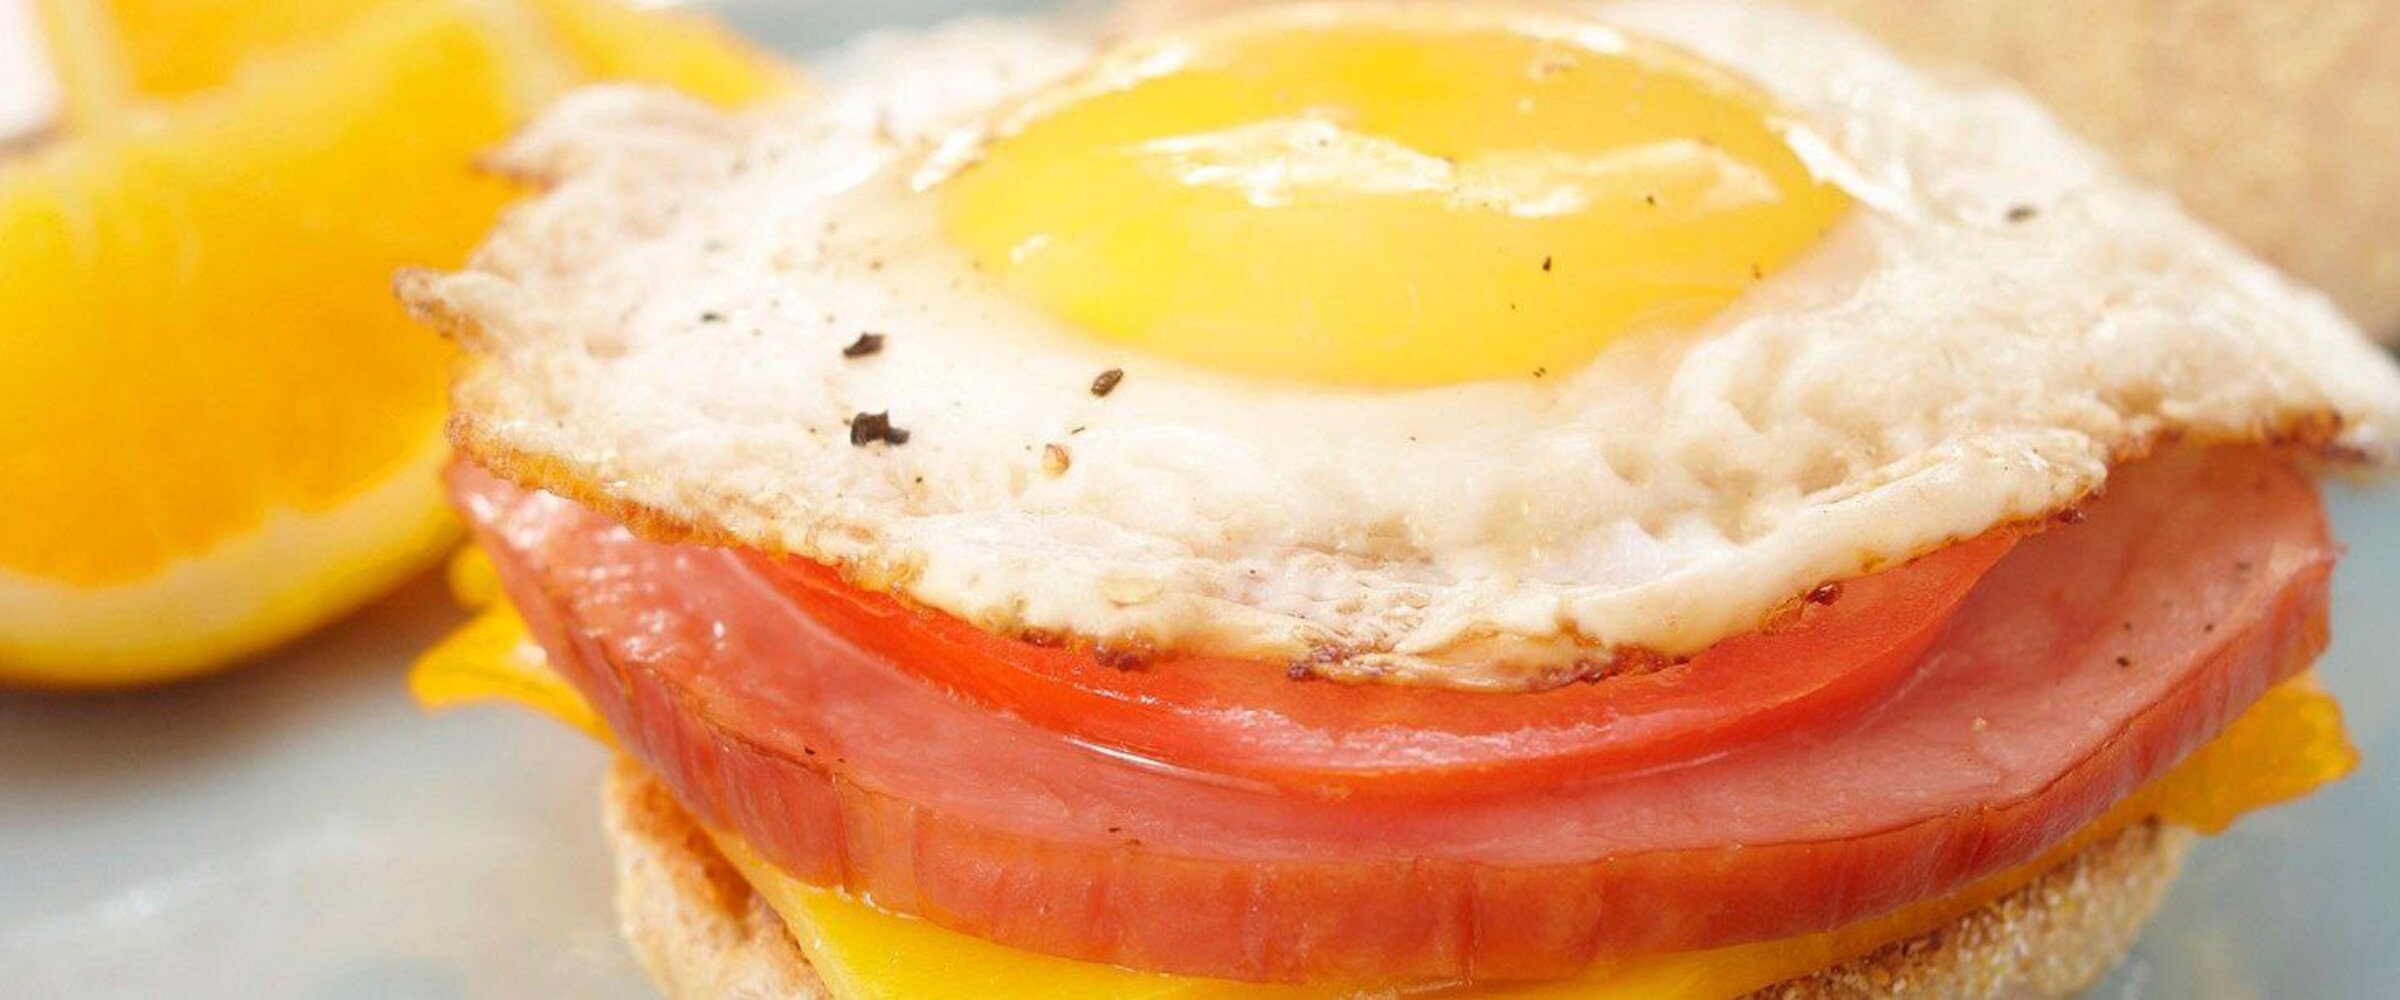 ham and egg on an English muffin